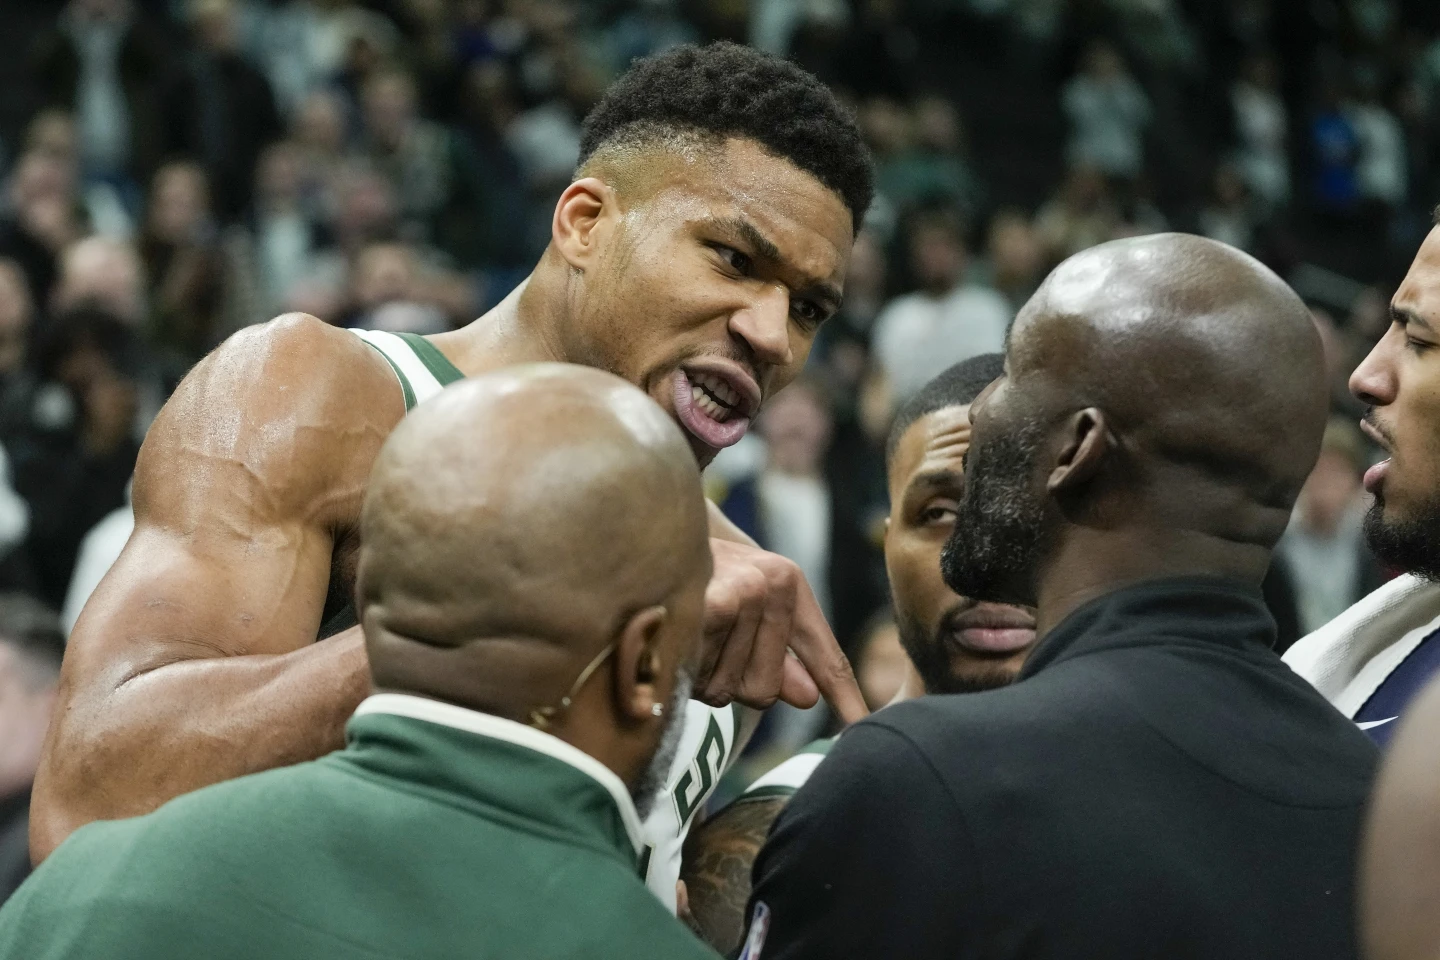 Bucks, Pacers square off in dispute over game ball after Giannis’ record-setting performance